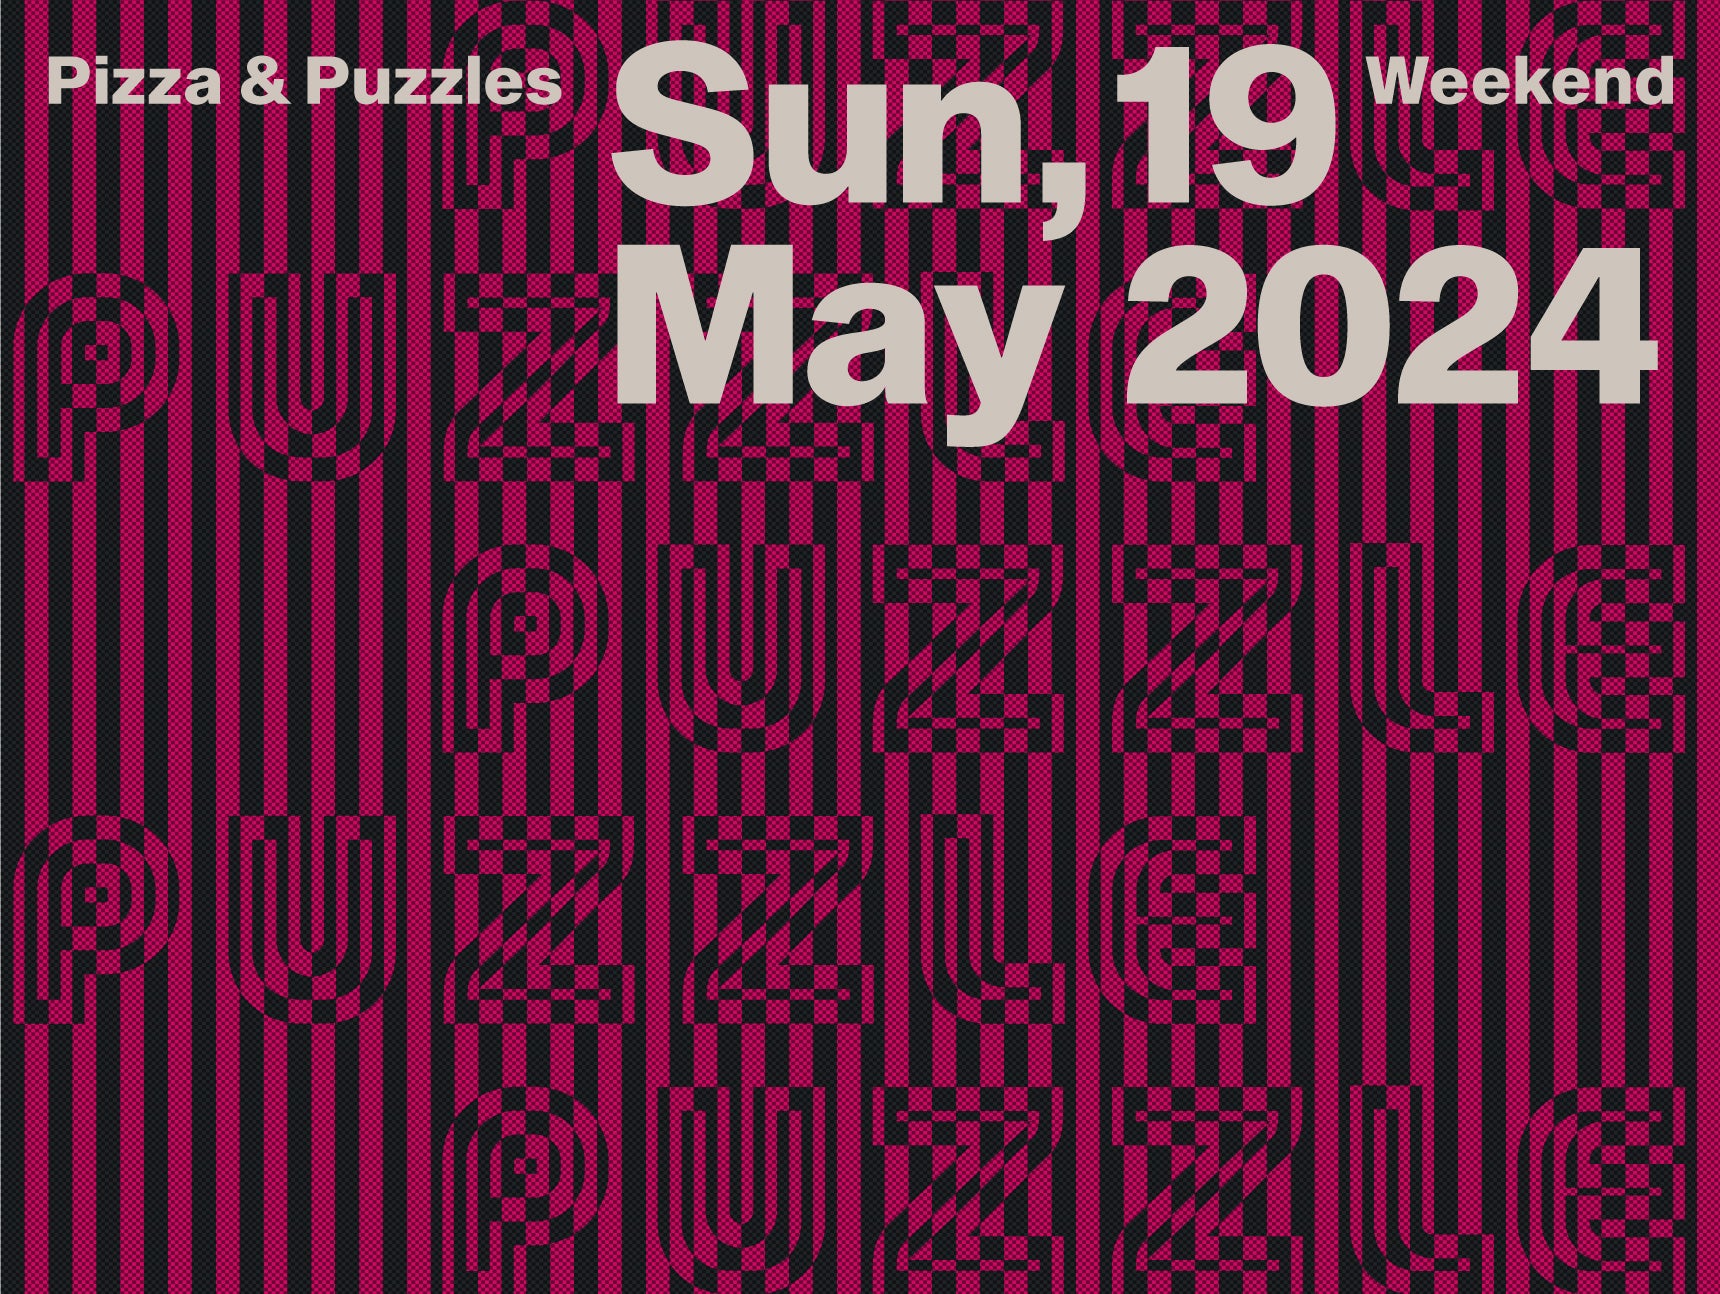 Team Jigsaw Puzzle Competition - 19 May 2024, Sunday